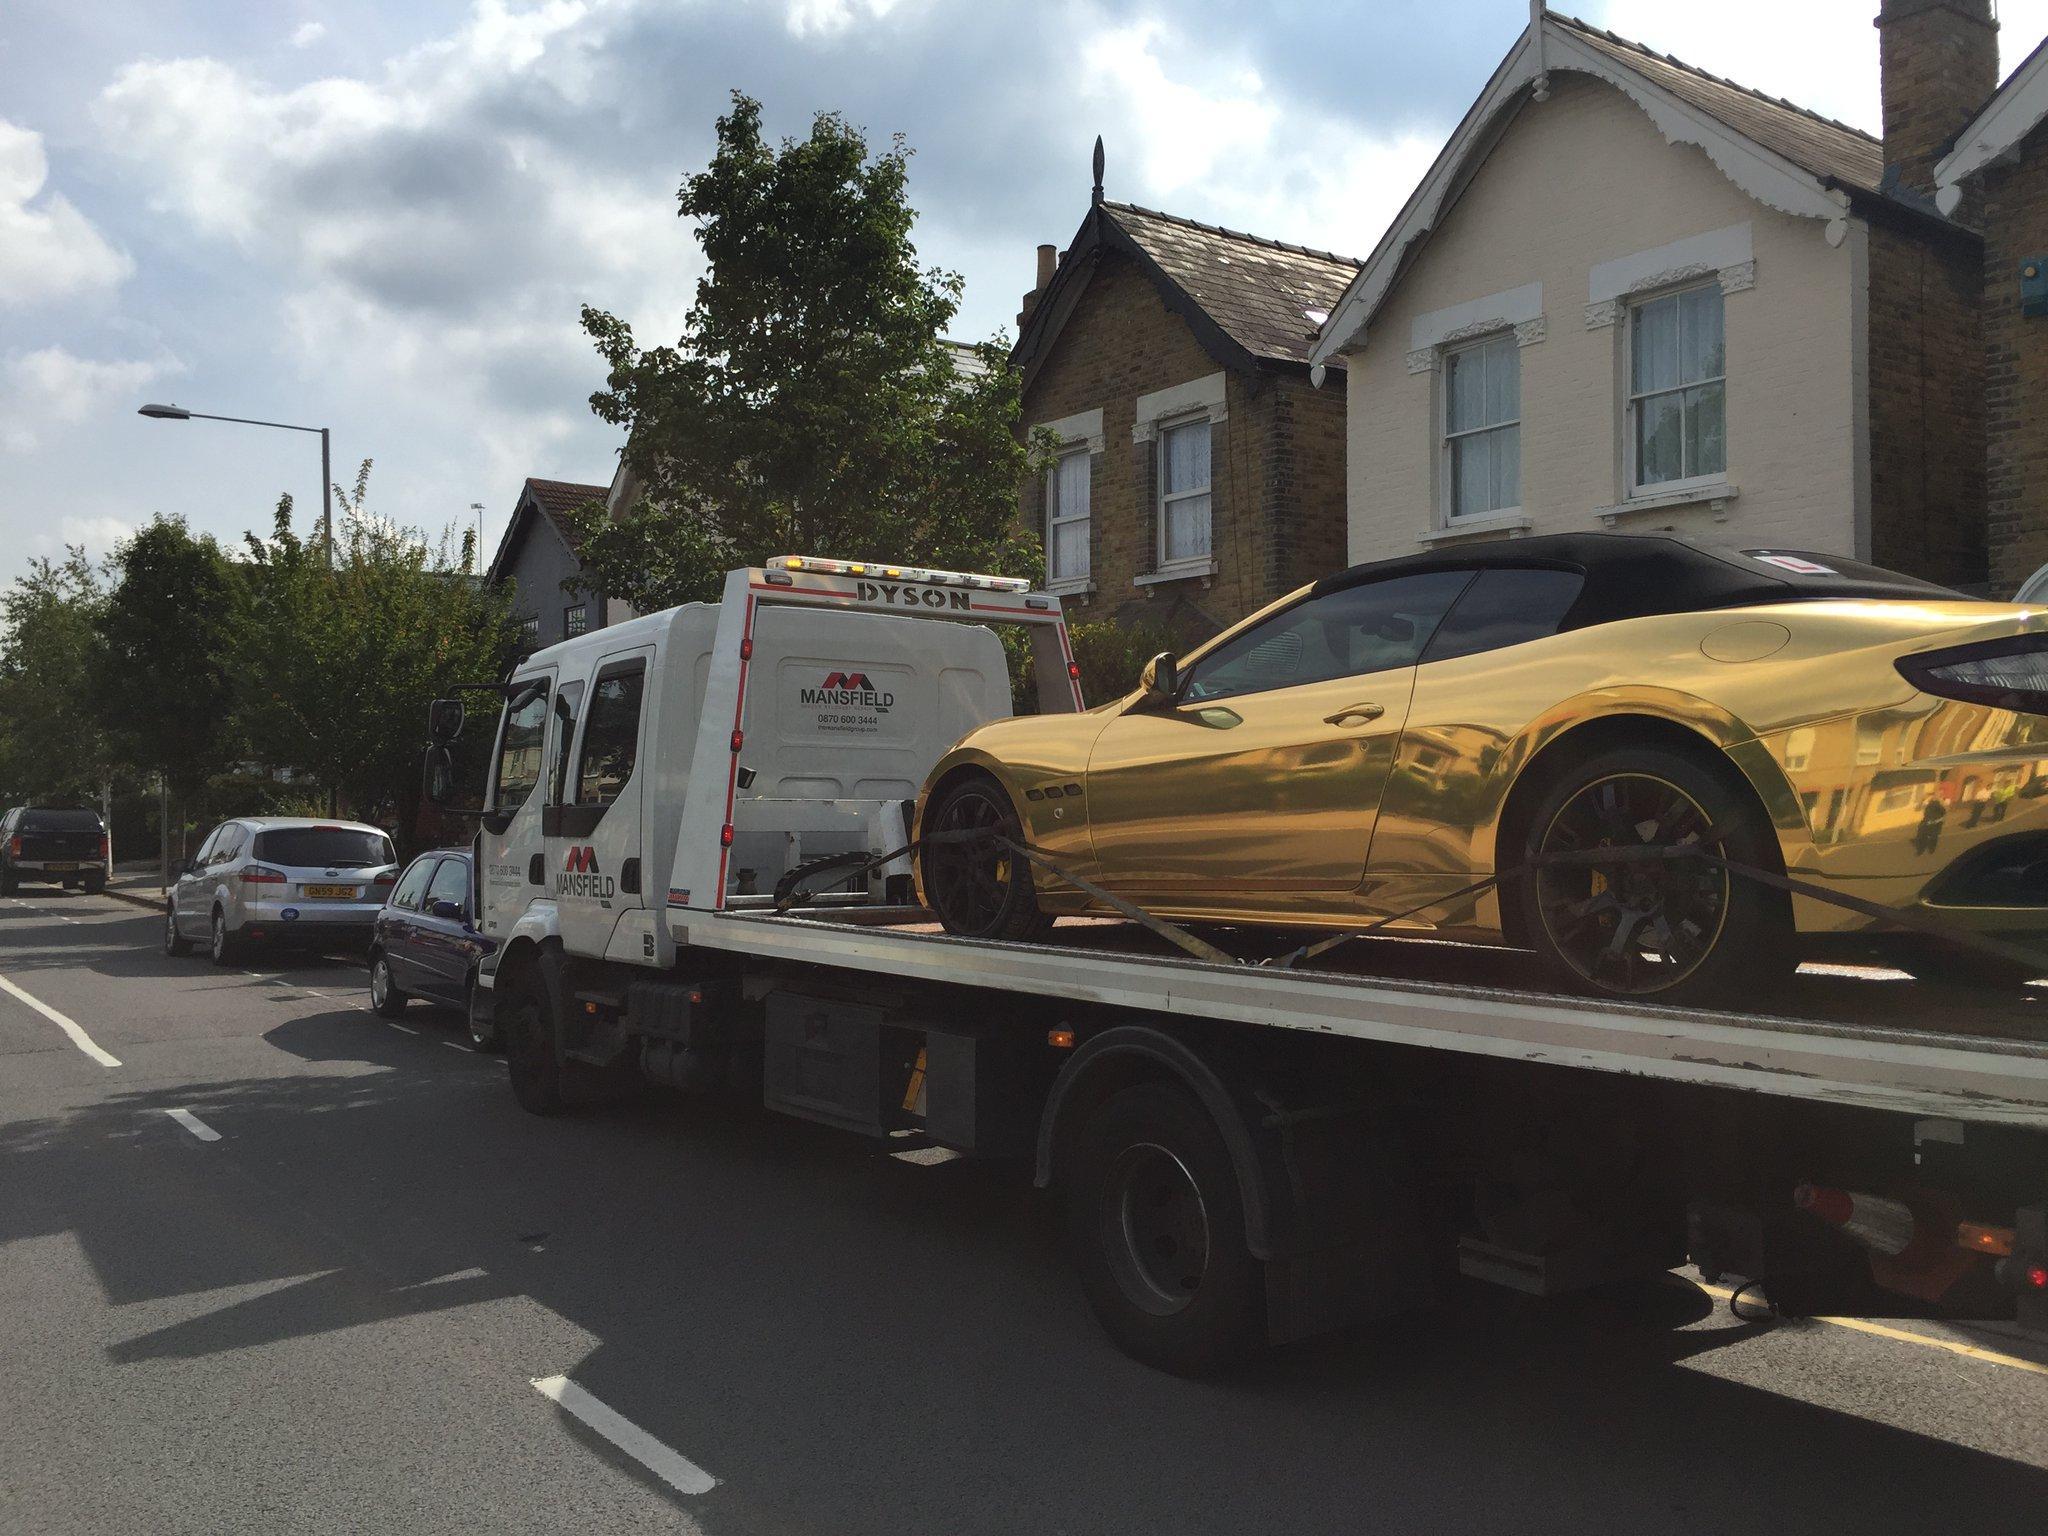 The supercar was seized by police after the driver of the car with L plates was discovered to have no insurance